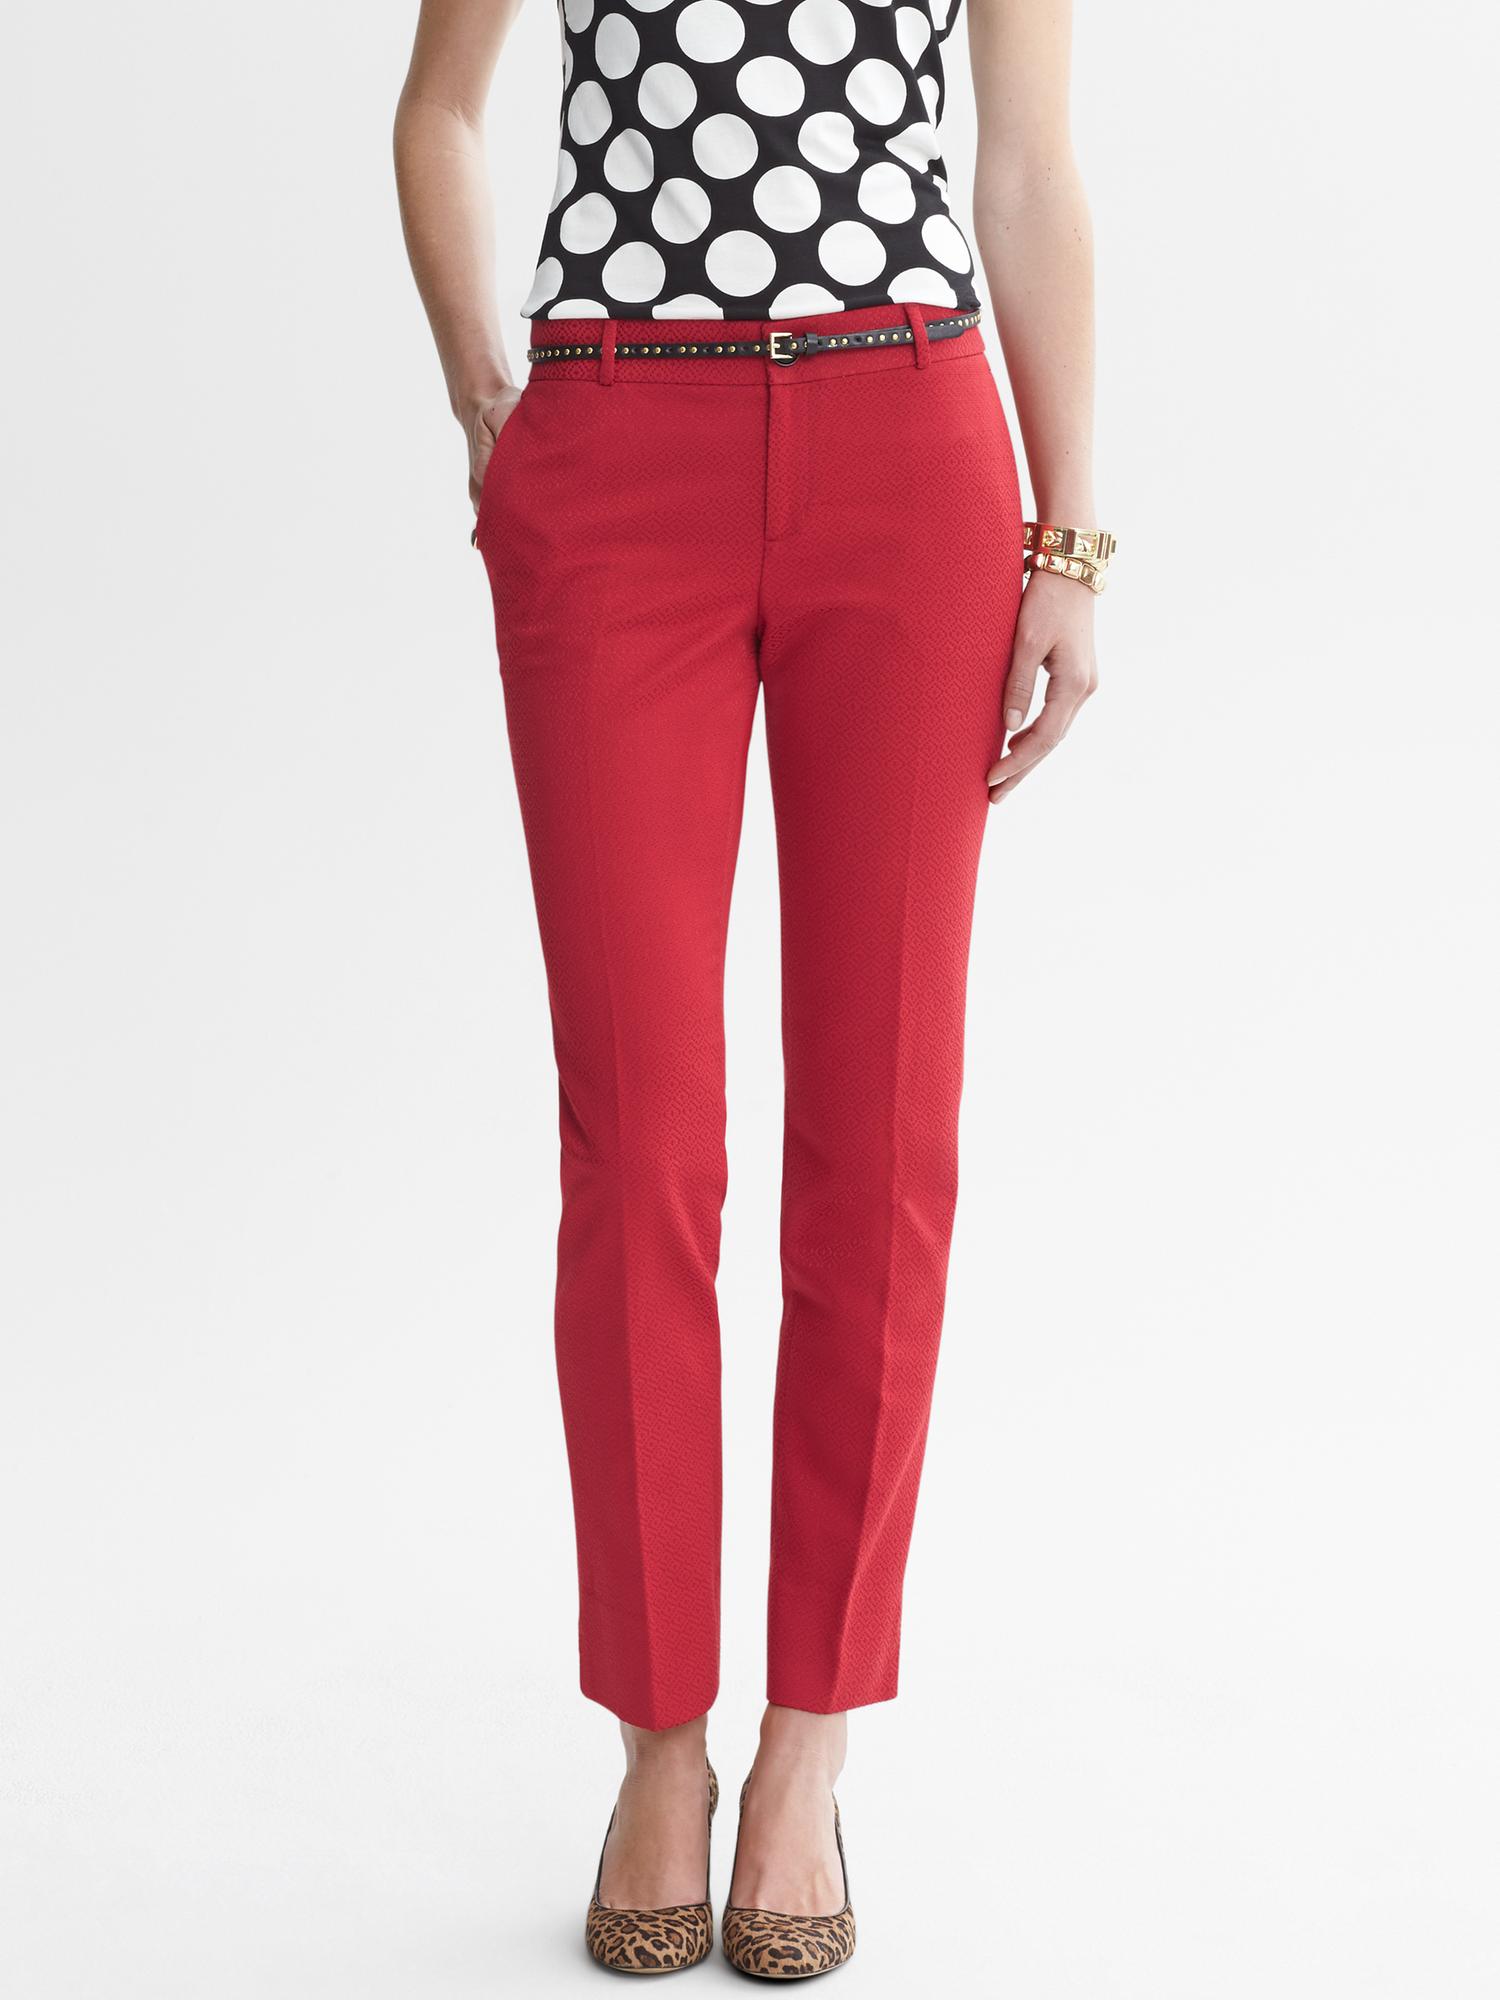 Banana Republic Camden Fit Red Jacquard Ankle Pant Saucy Red in Red ...